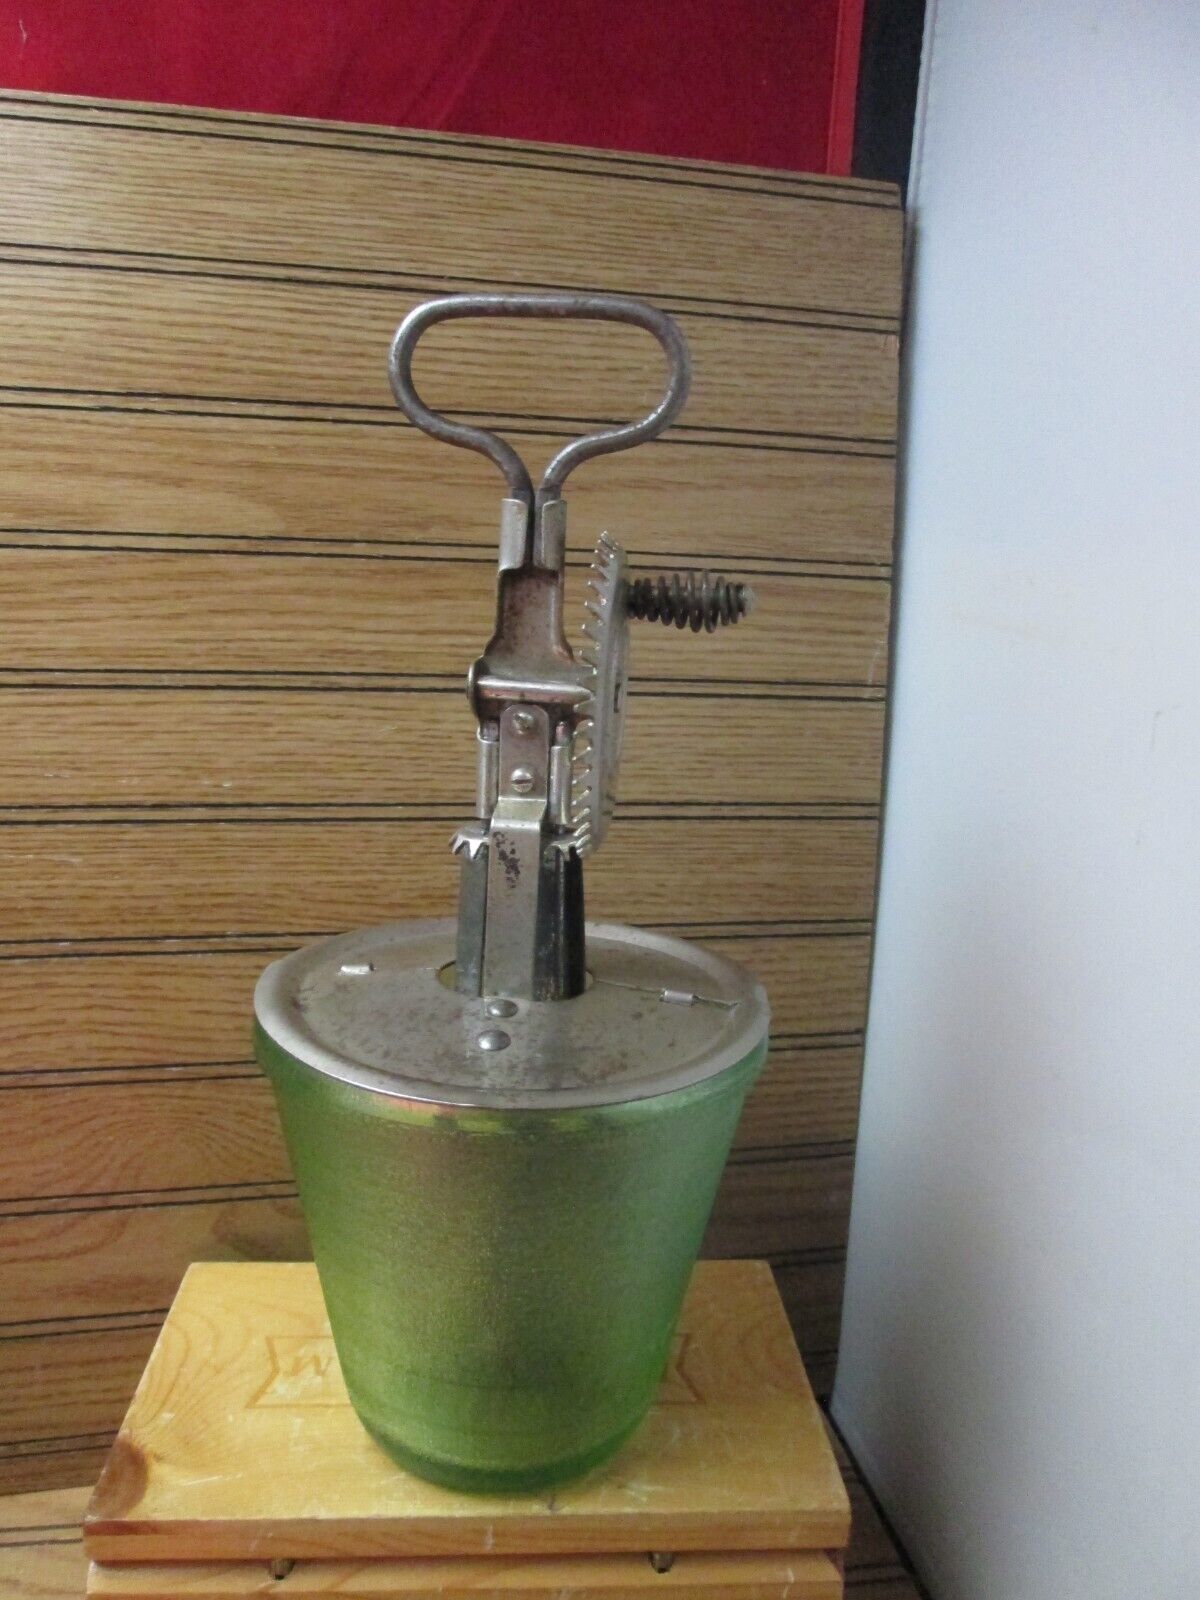 Vintage A & J Hand Mixer Egg Beater Green Depression Glass Measuring Cup 16 oz